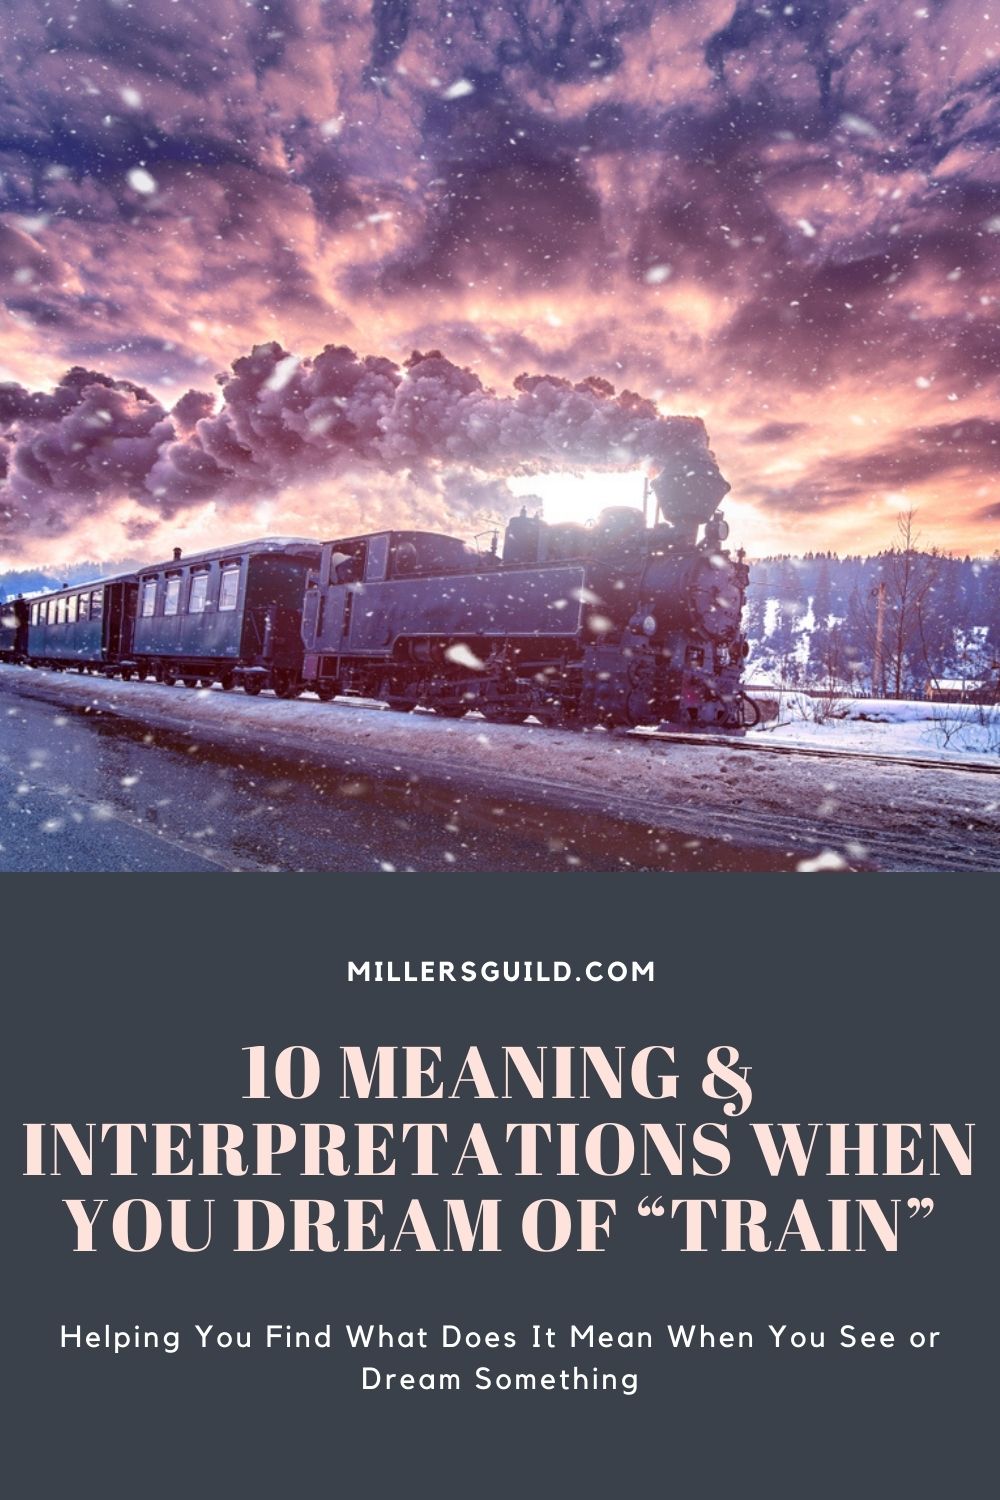 10 Meaning & Interpretations When You Dream Of “Train” 1